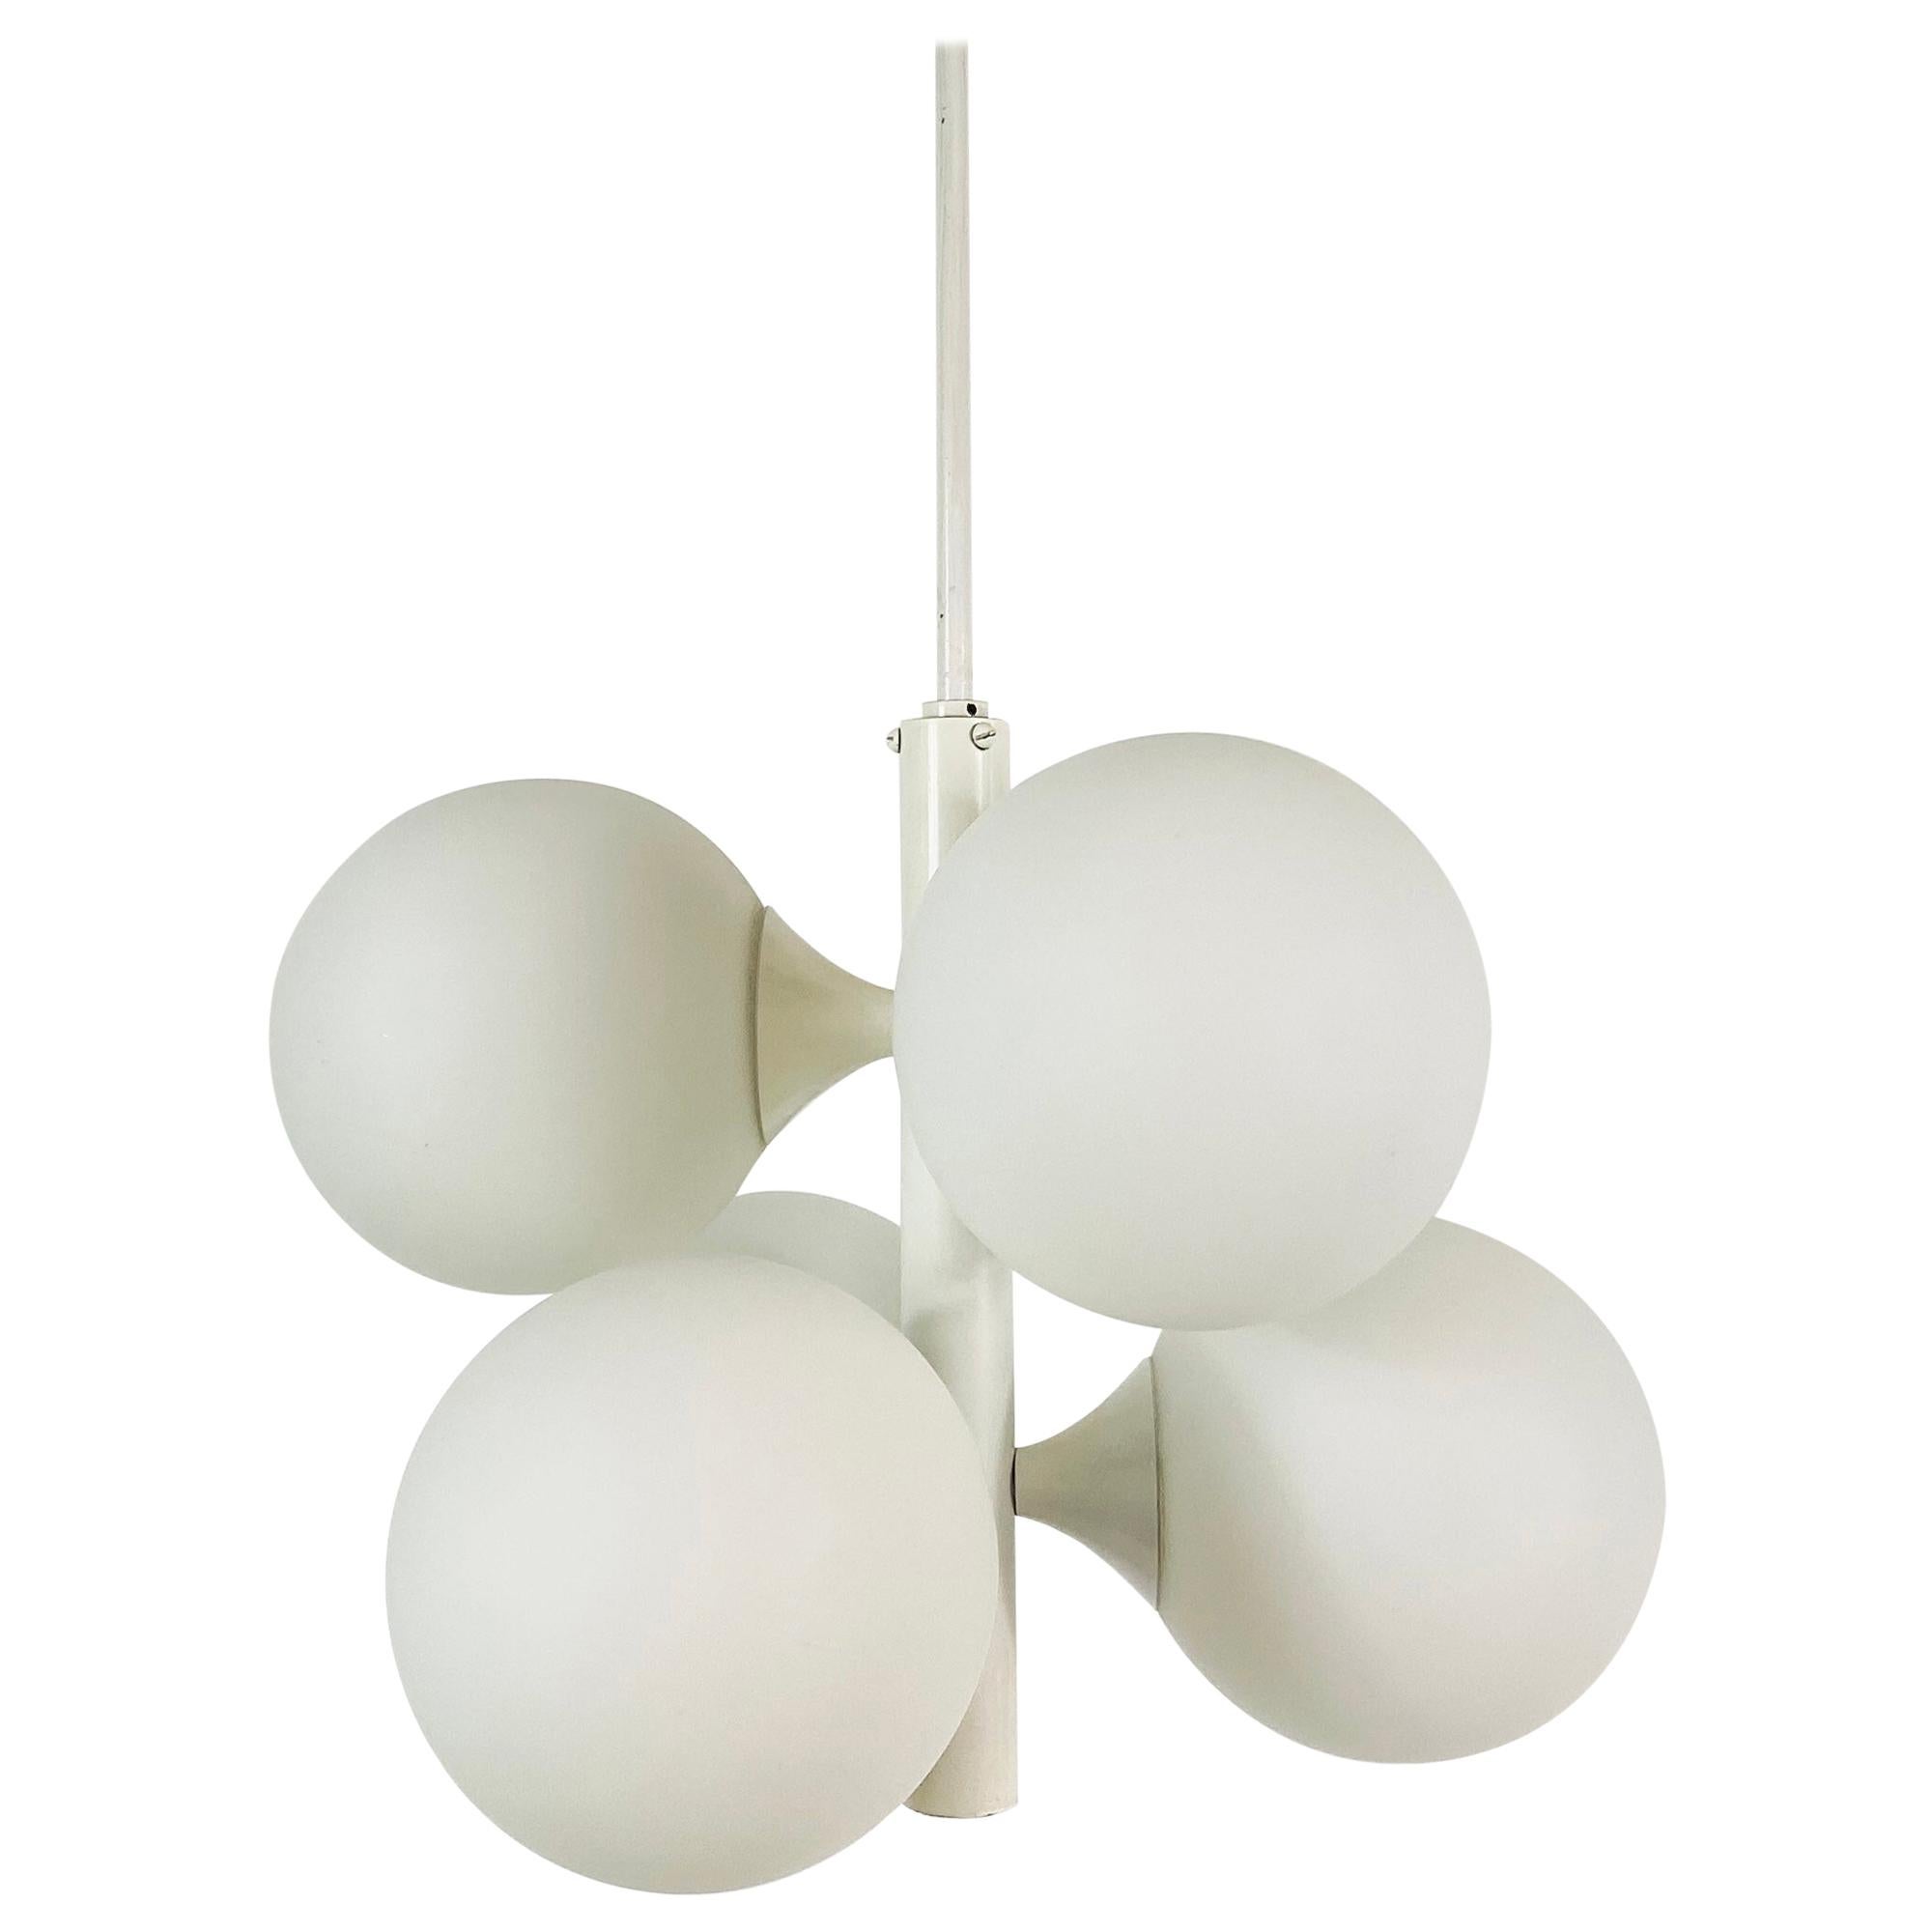 Rare Kaiser Midcentury White 4-Arm Space Age Chandelier, 1960s, Germany